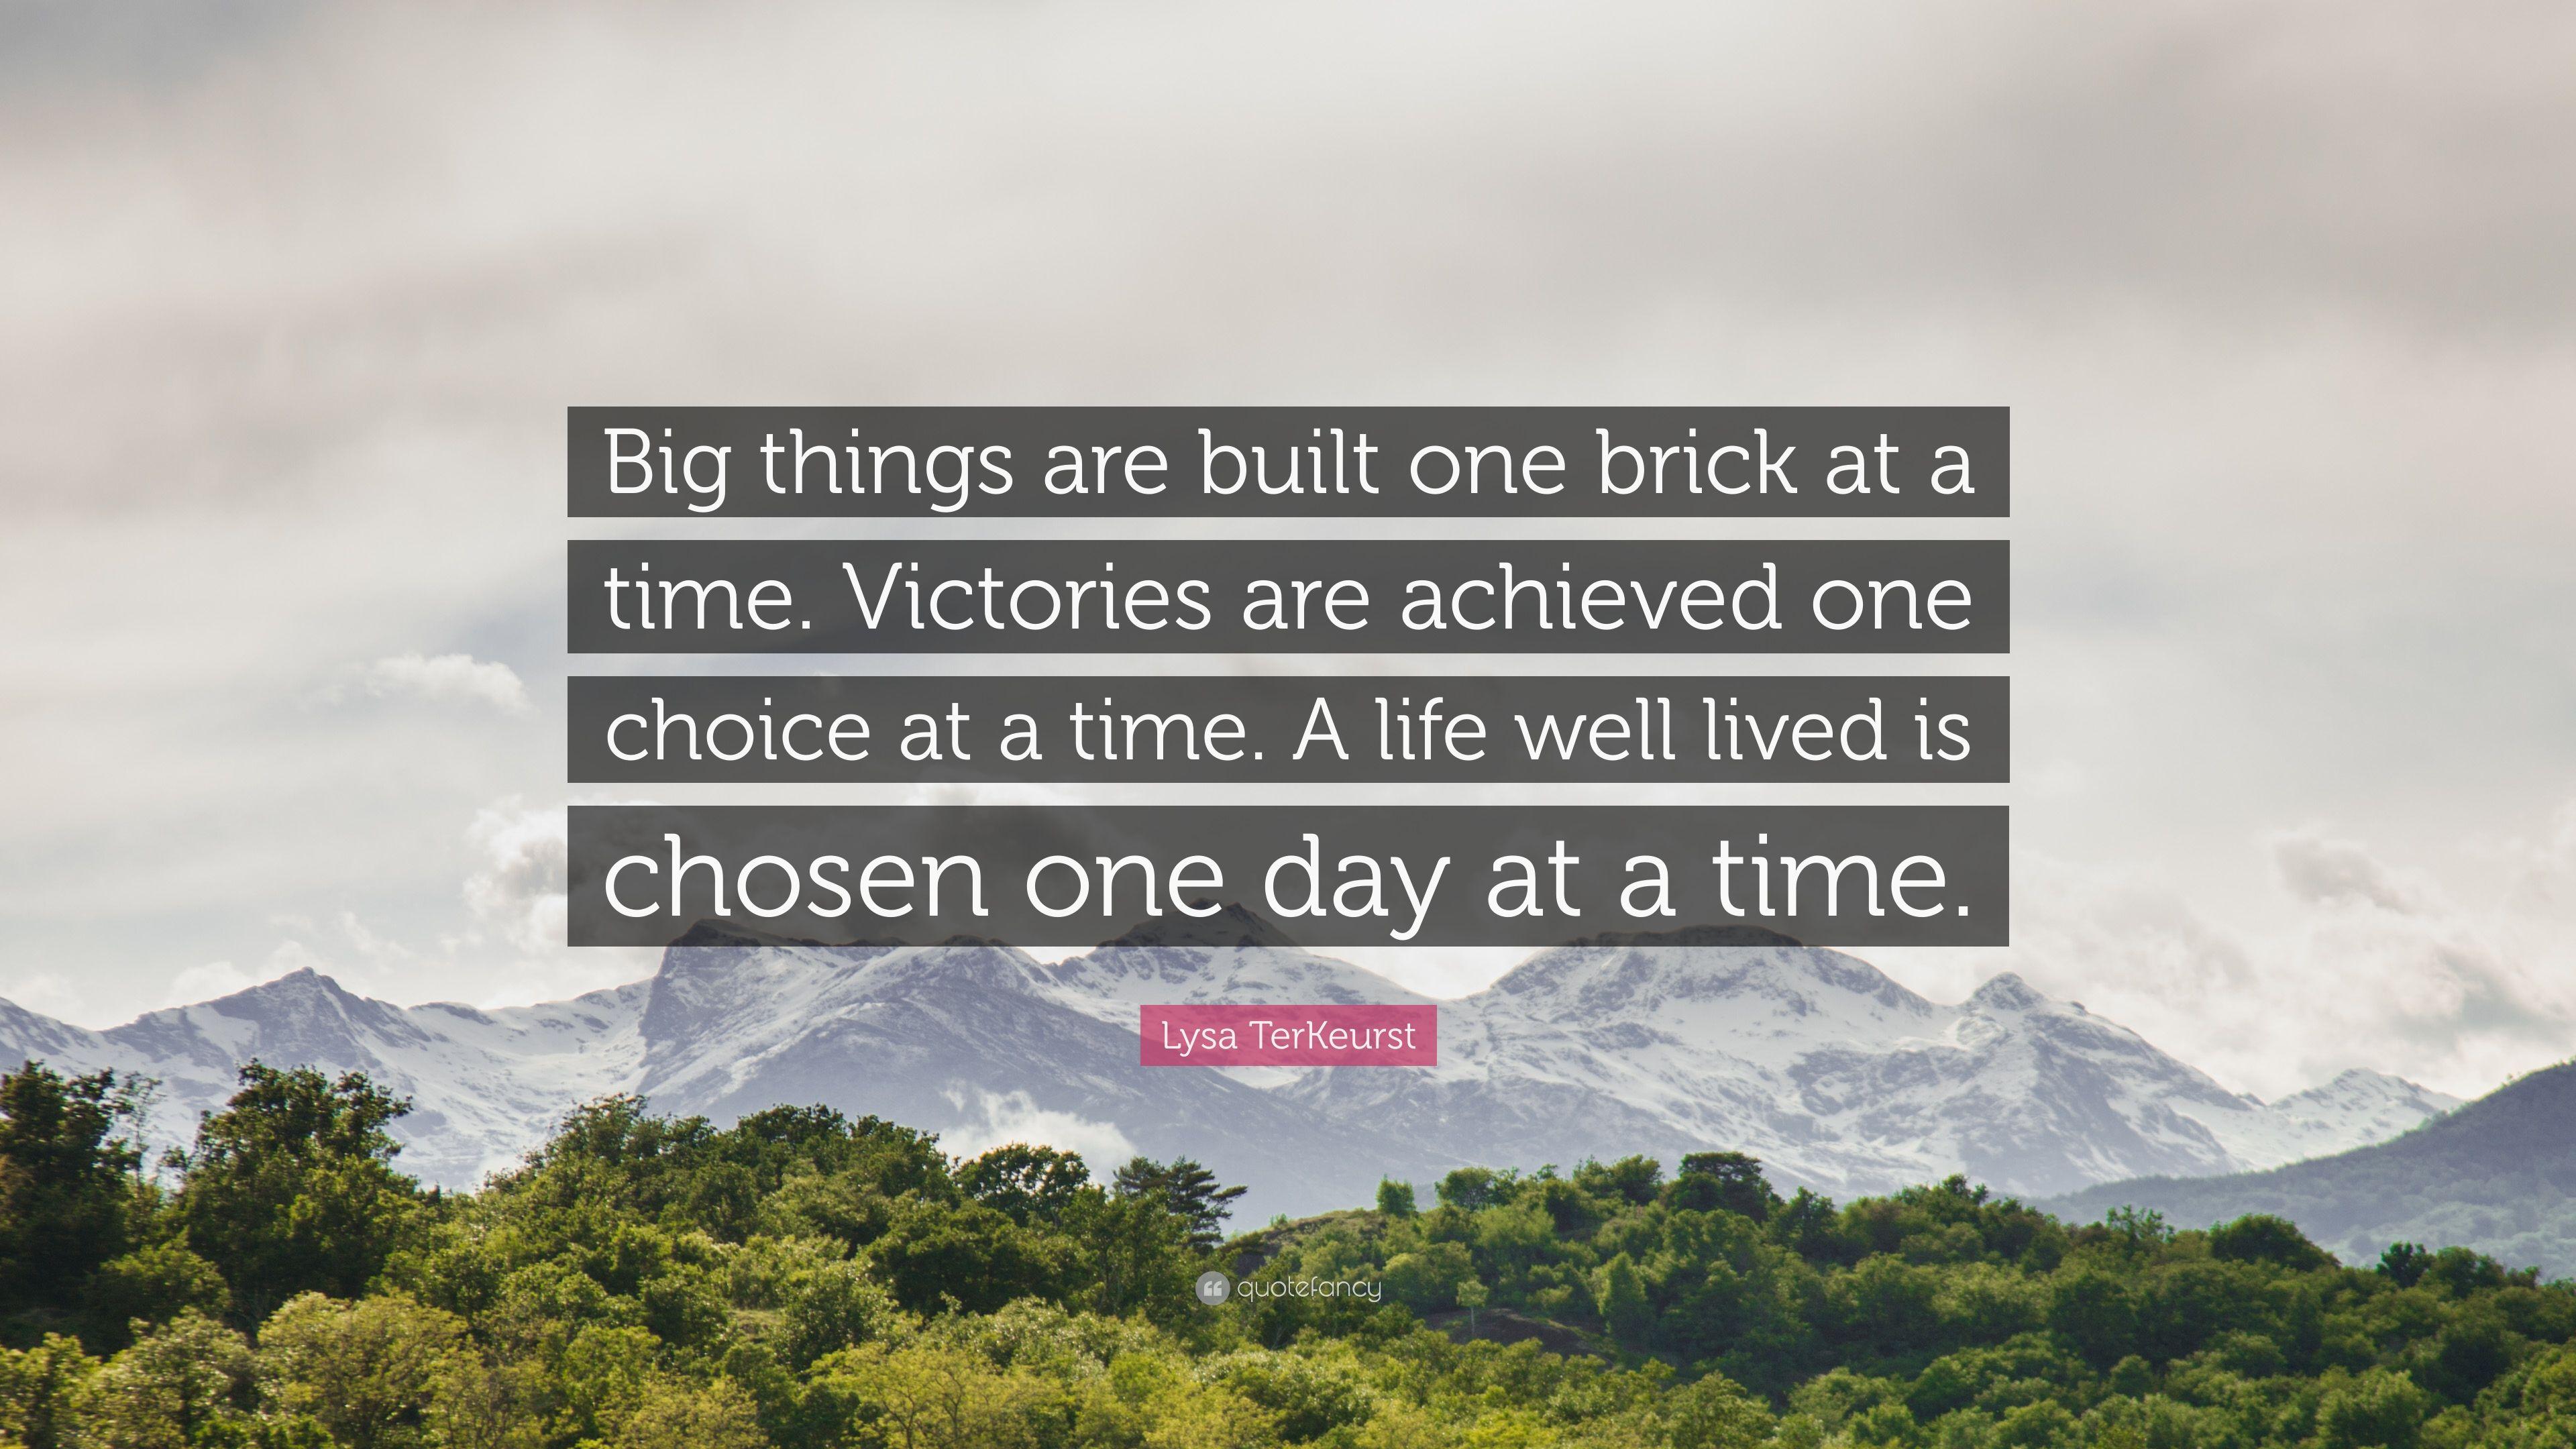 Lysa TerKeurst Quote: “Big things are built one brick at a time